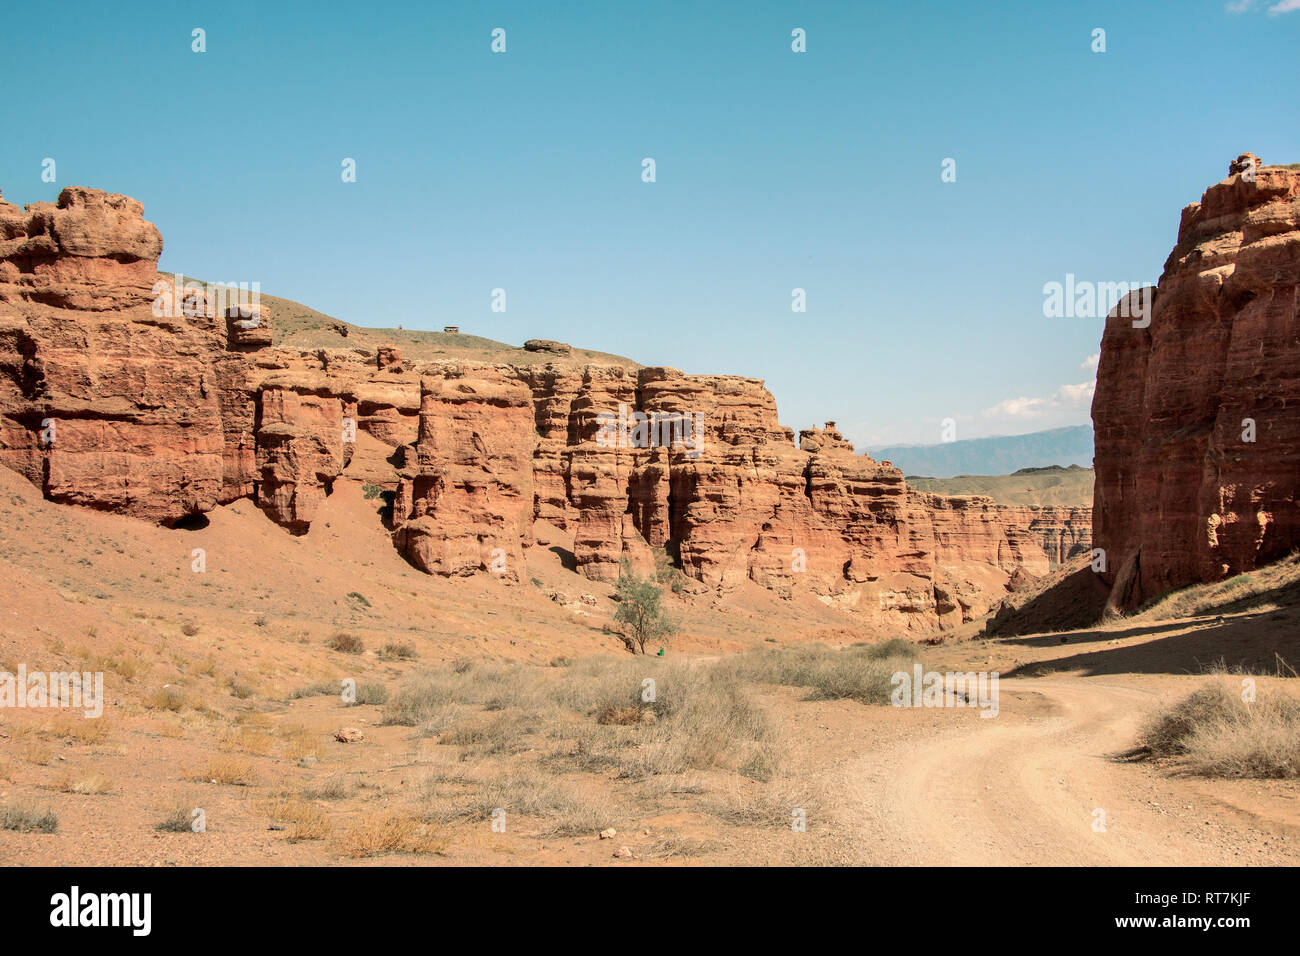 Dirt road down the Valley of Castles, Charyn Canyon, Kazakhstan Stock Photo